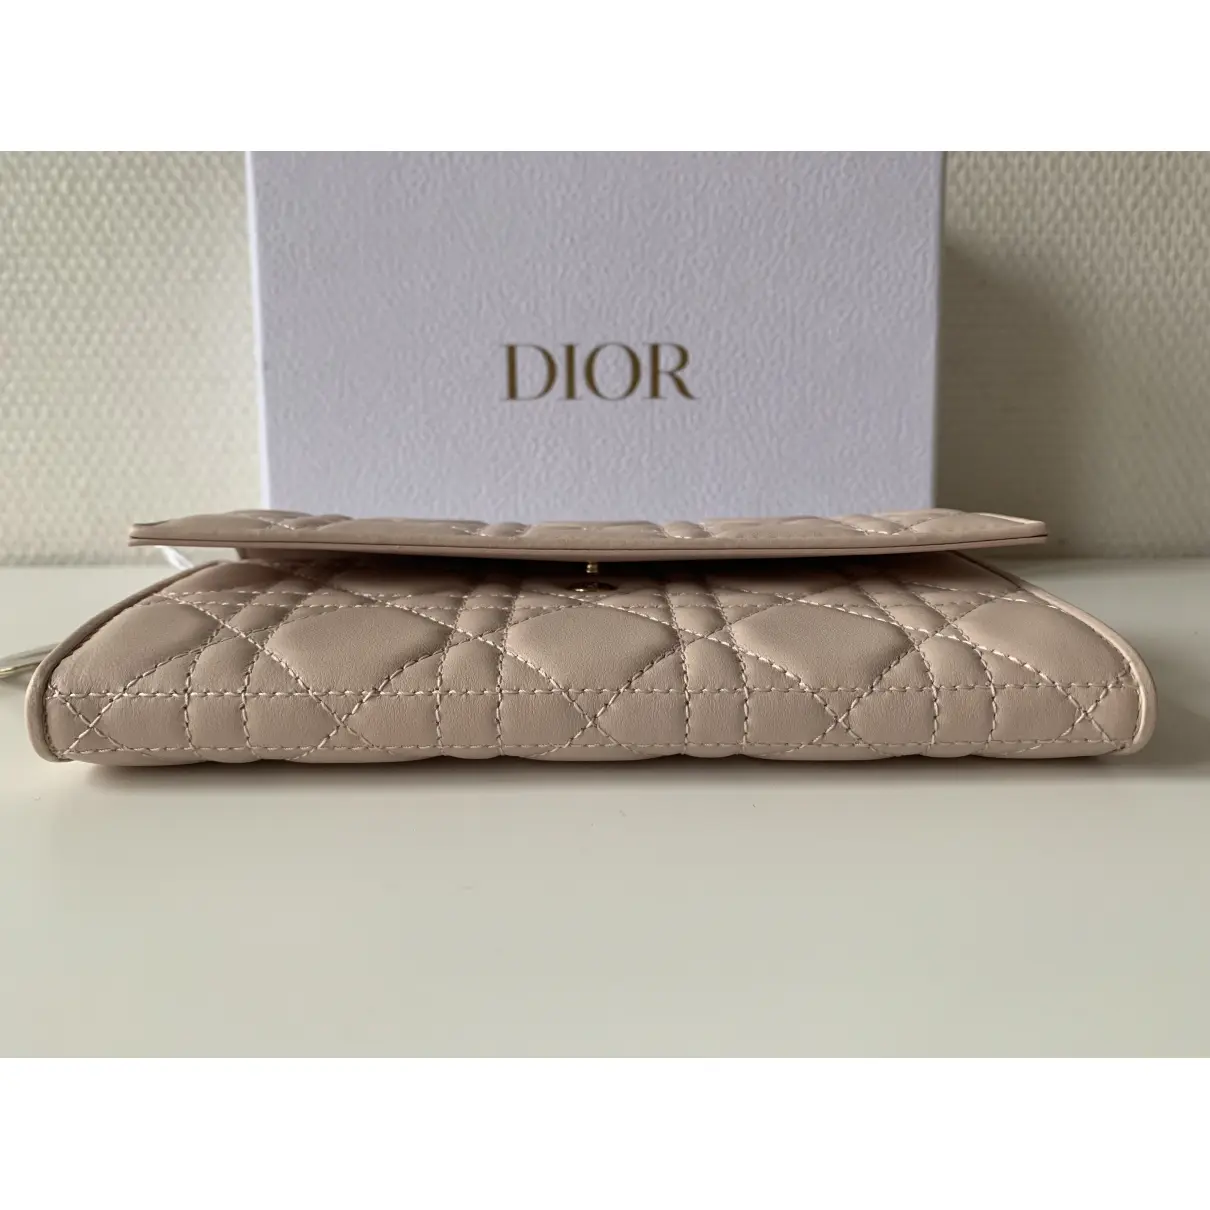 Lady Dior leather wallet Dior